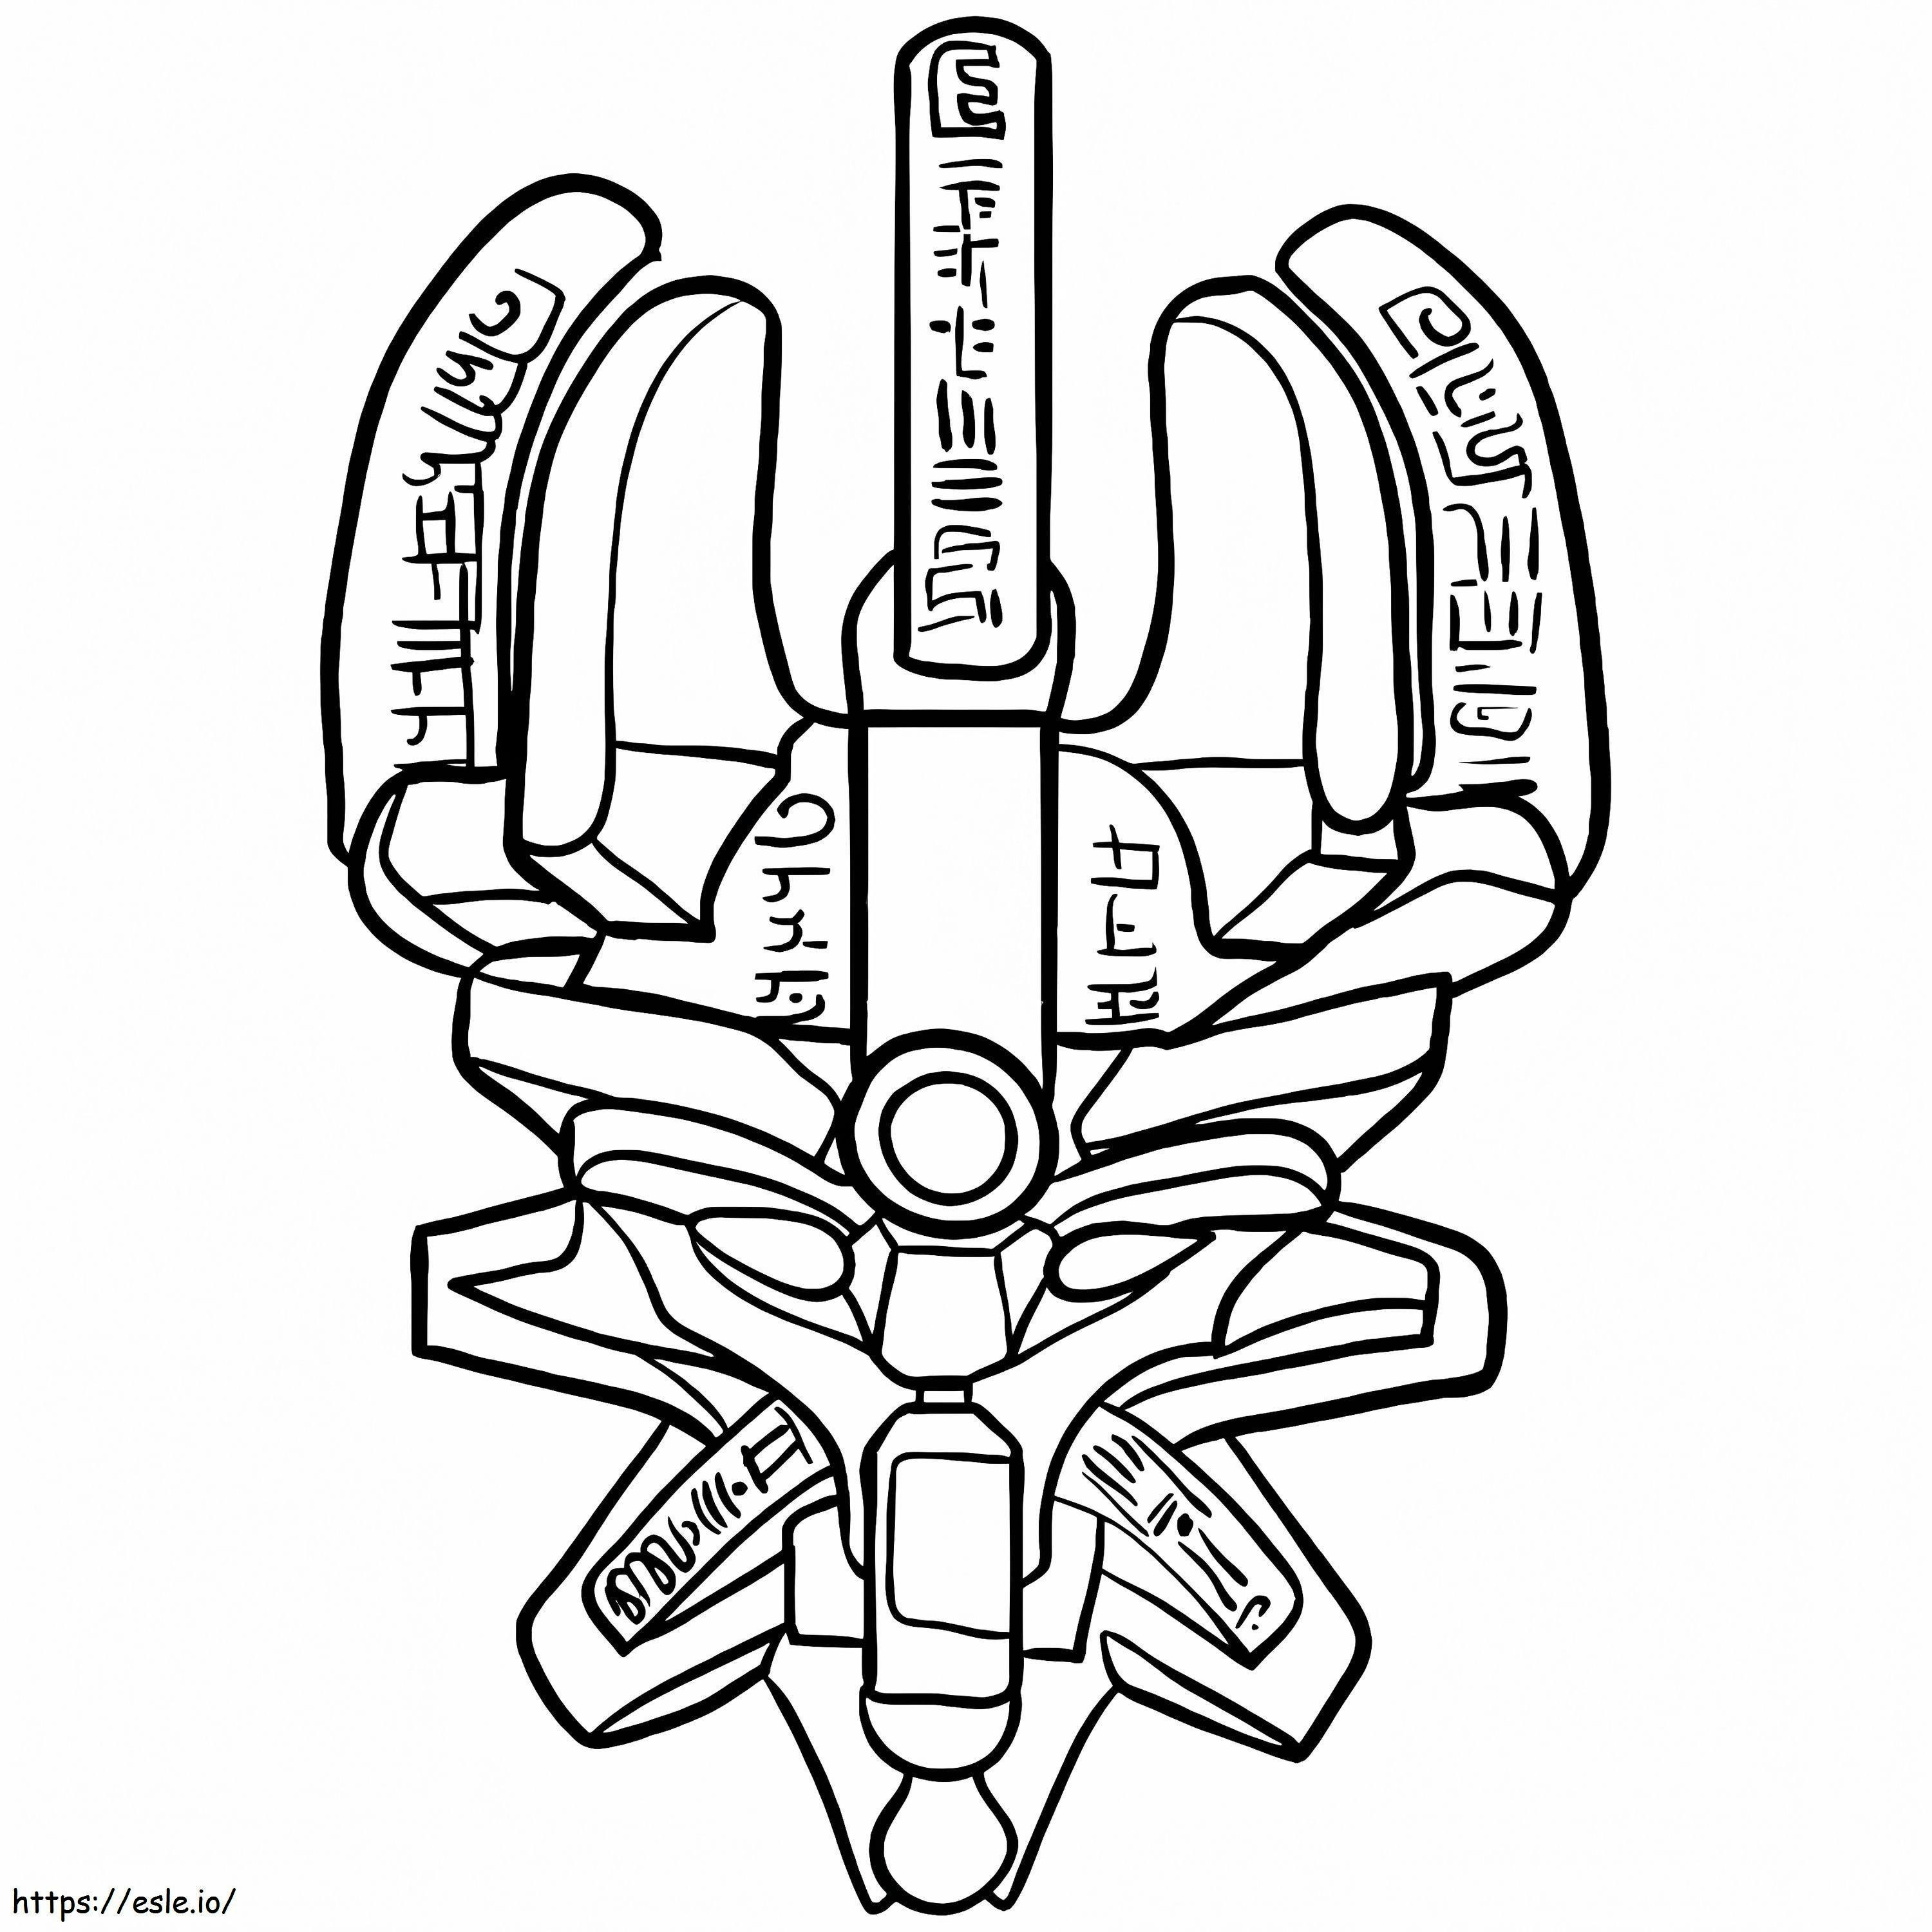 Mask Bionicle coloring page